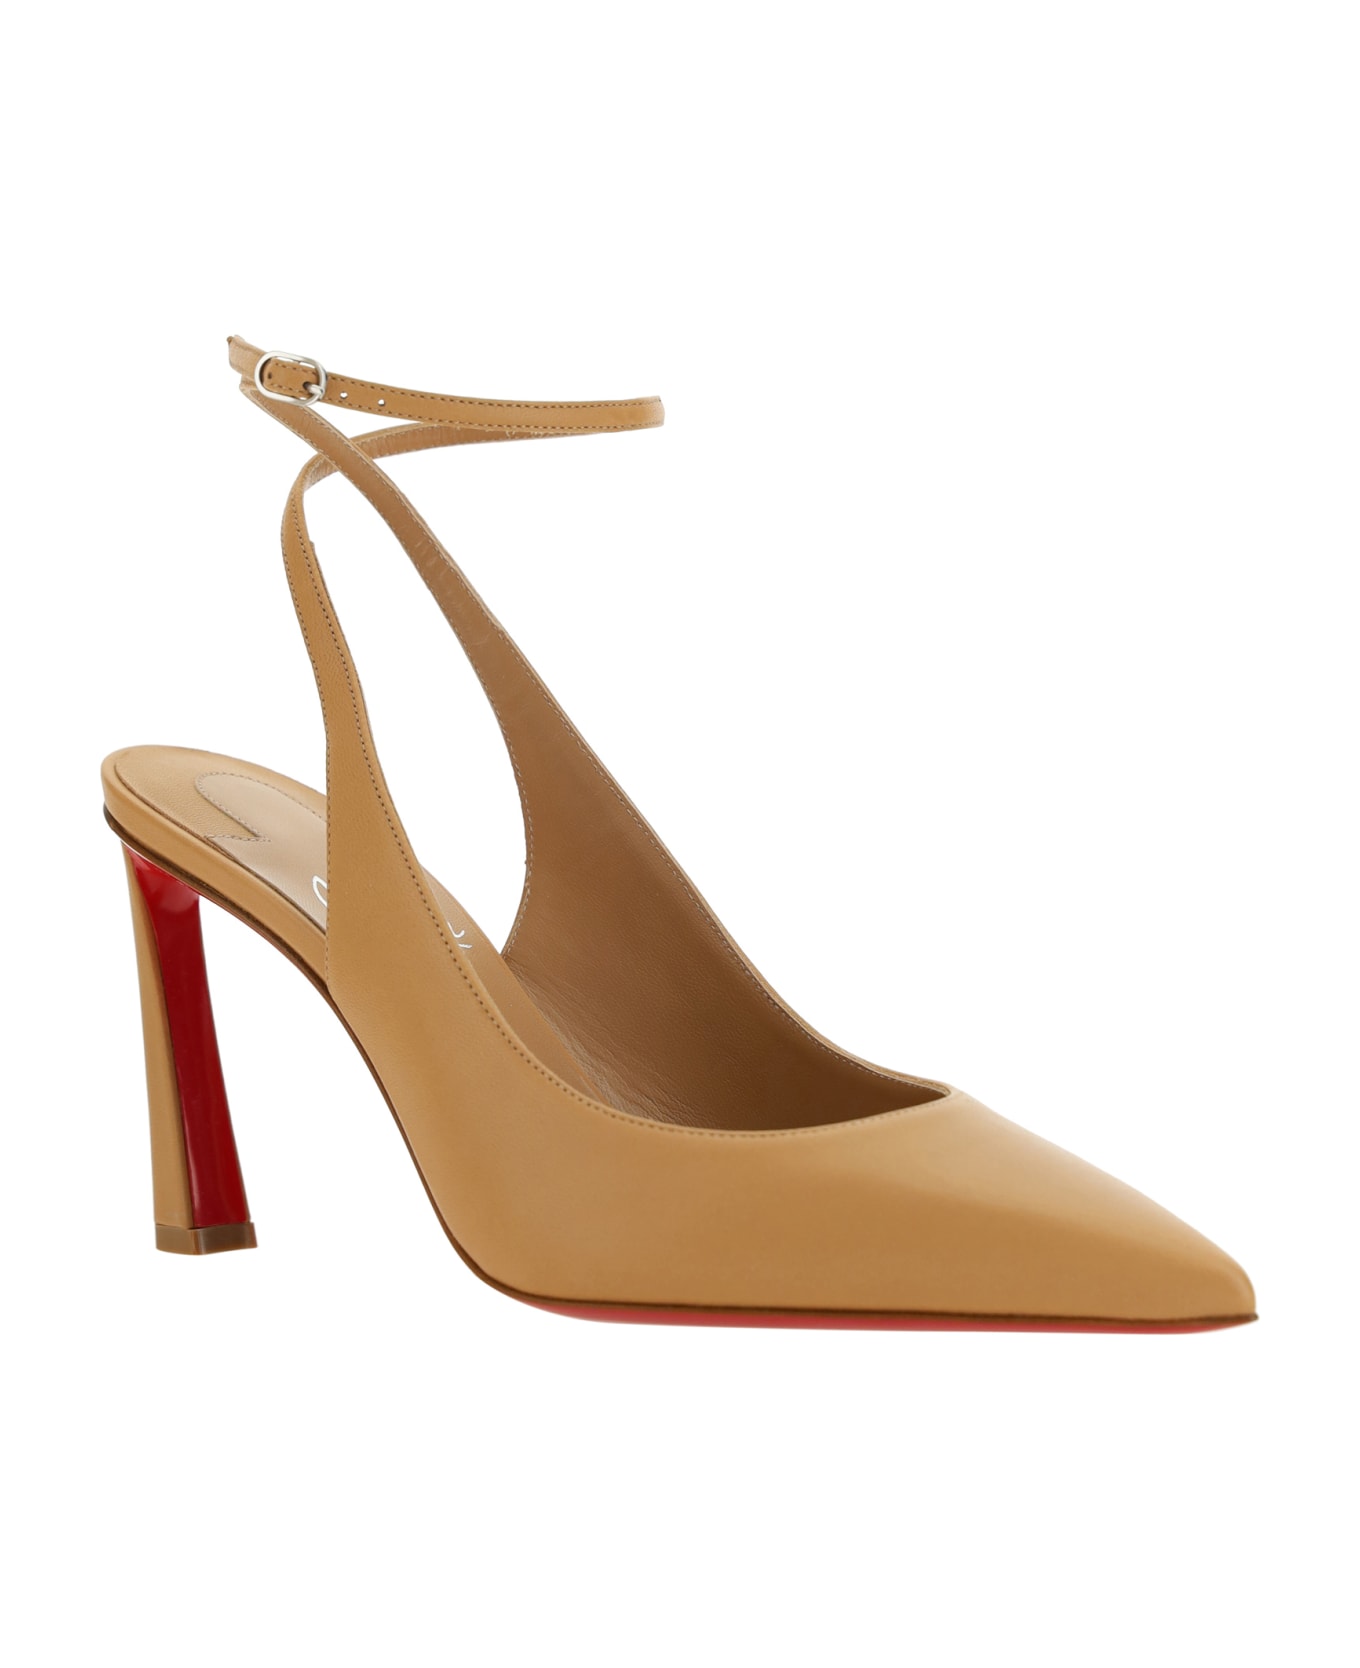 Christian Louboutin Condora Strap Pumps - Toffee/lin Toffee